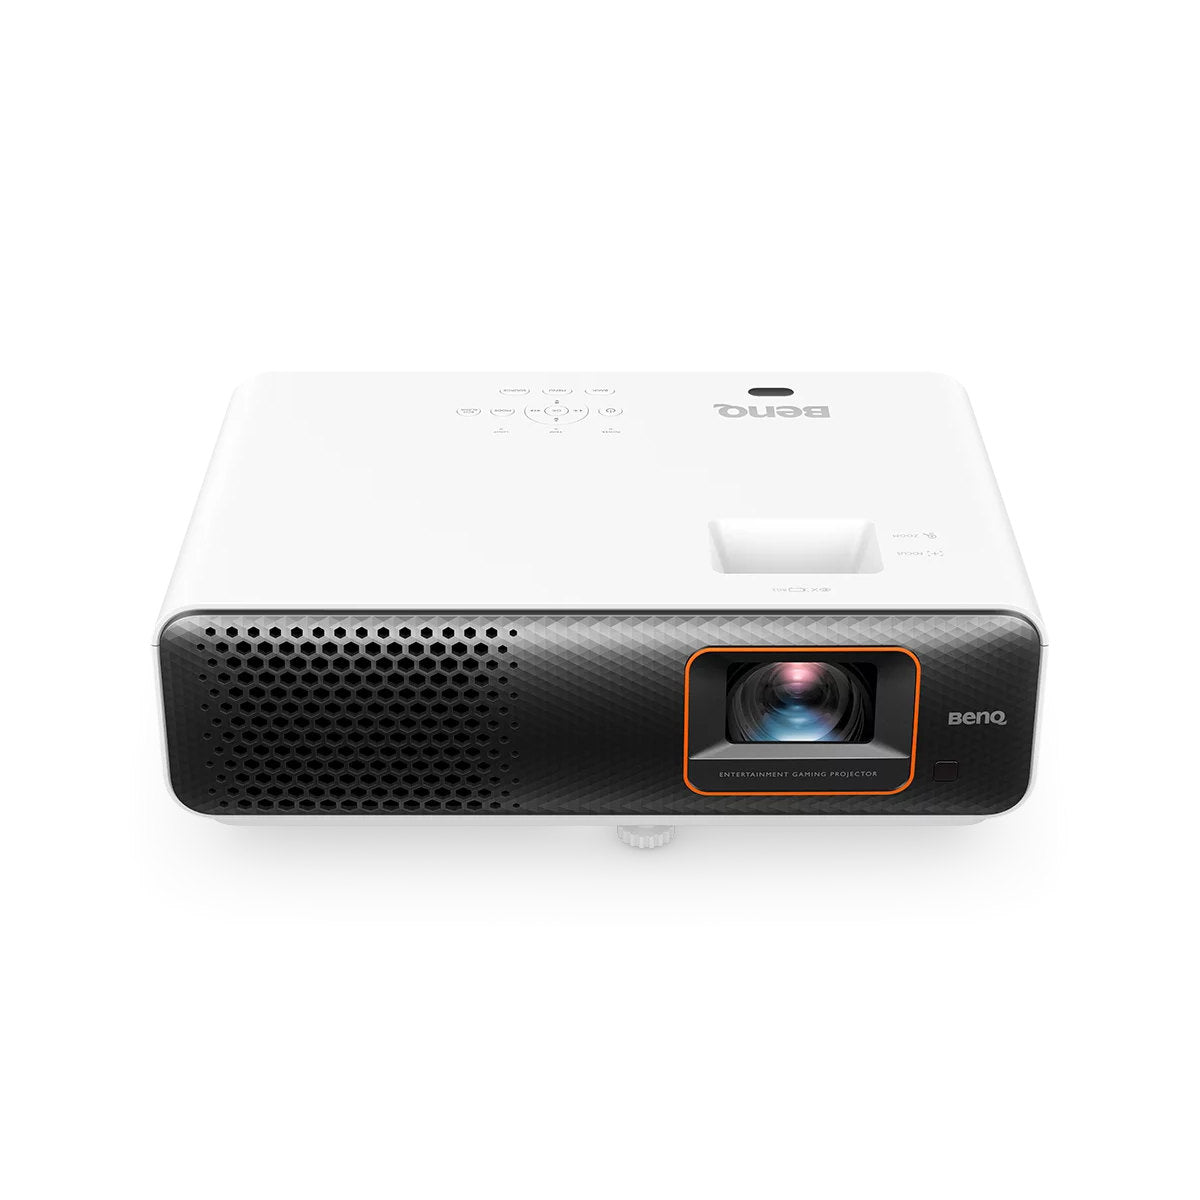 BenQ TH690ST 4LED 1080p HDR Short Throw Projector - Ooberpad India